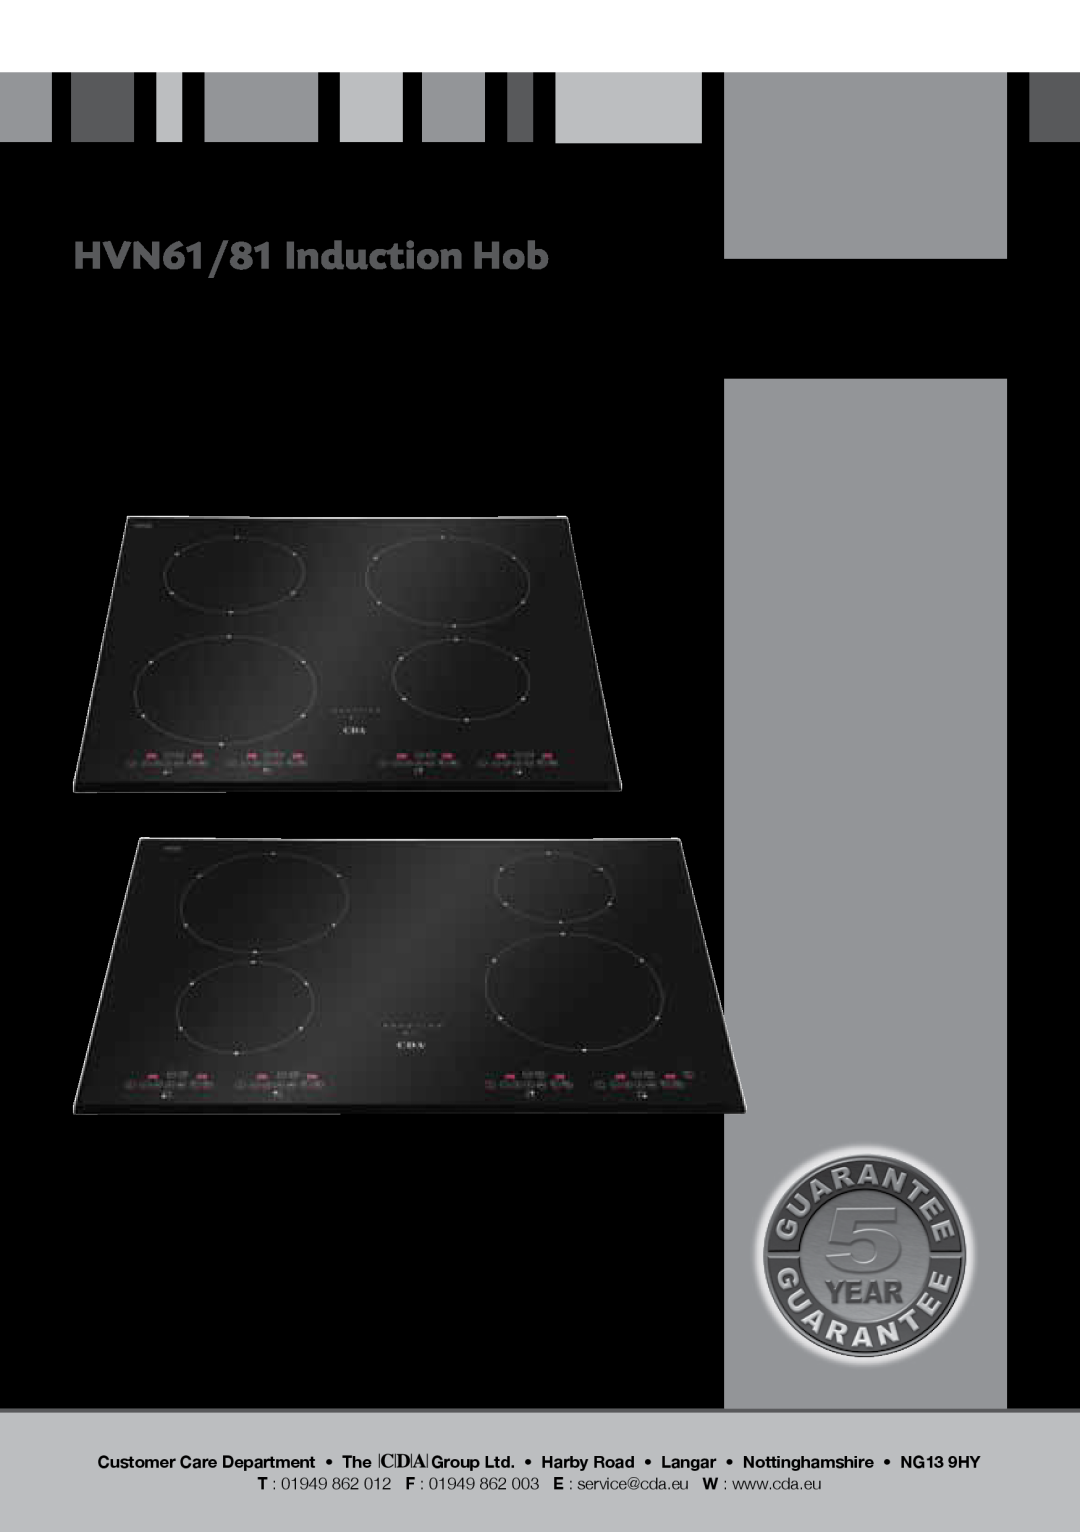 CDA manual HVN61/81 Induction Hob, Manual for Installation, Use and Maintenance, Customer Care Department The 